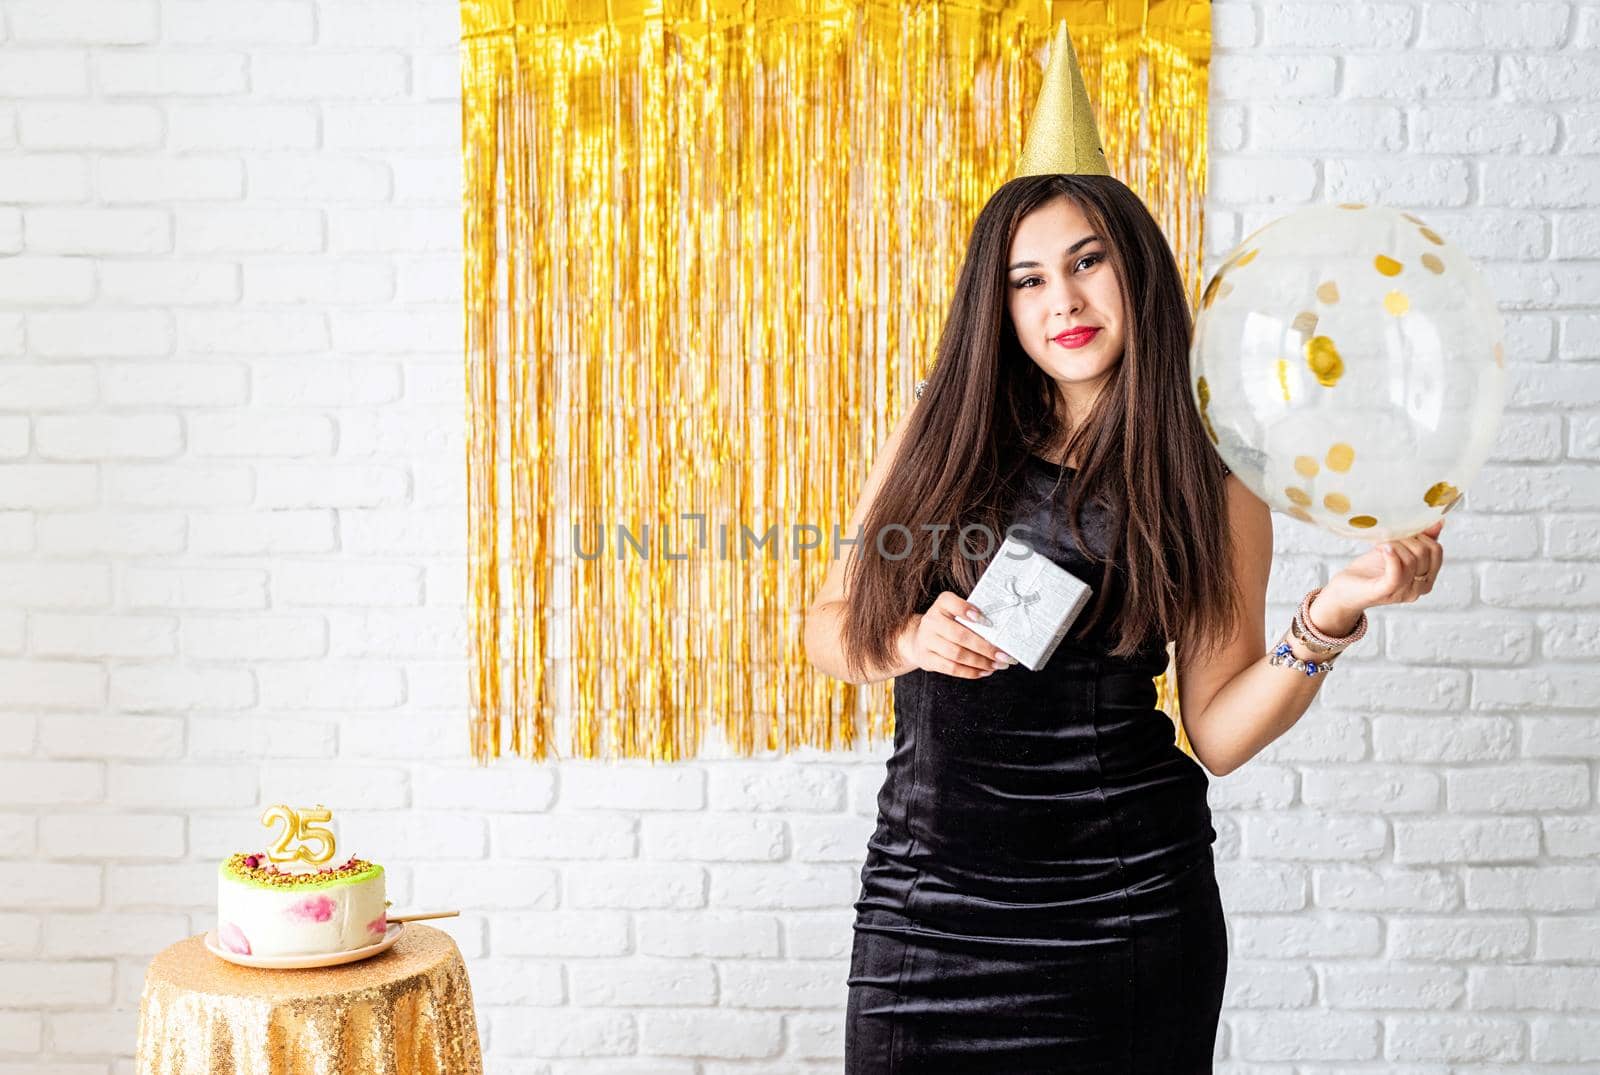 Birthday party. BBeautiful young woman in party dress and birthday hat holding balloon on golden background